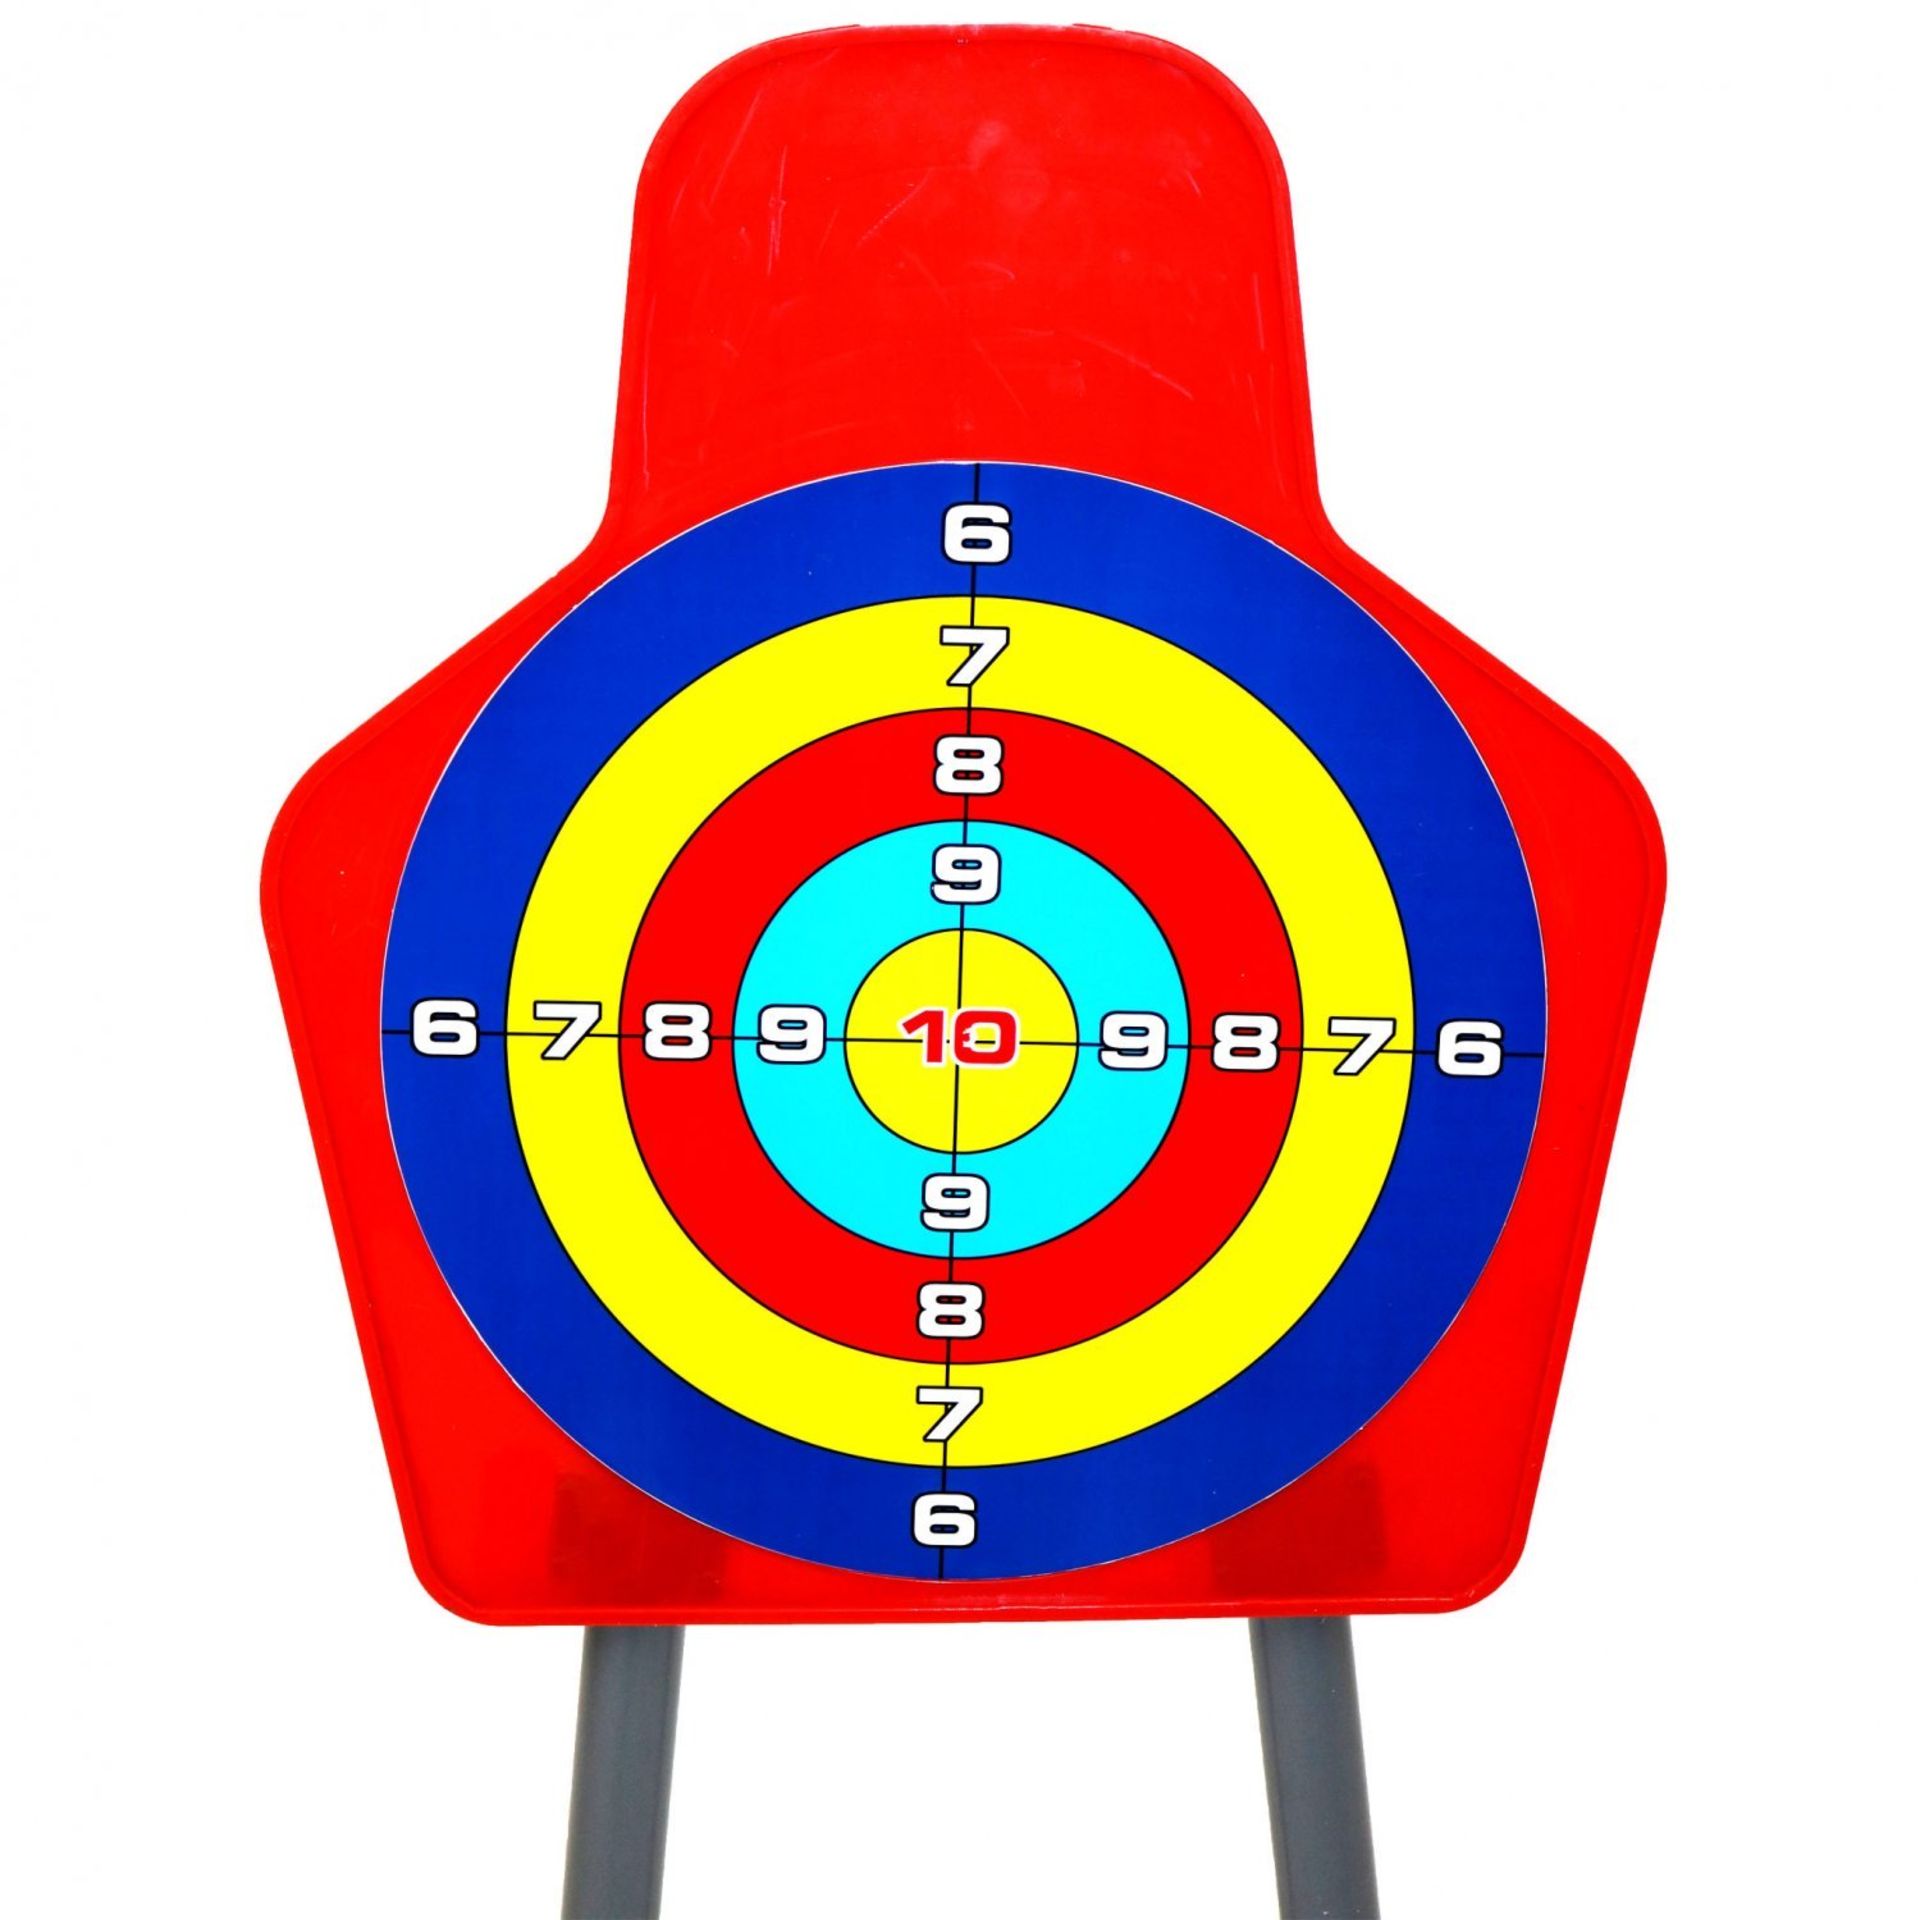 (RU358) Kids Toy Bow & Arrow Archery Target Set Outdoor Garden Game The archery set is perfe... - Image 2 of 2